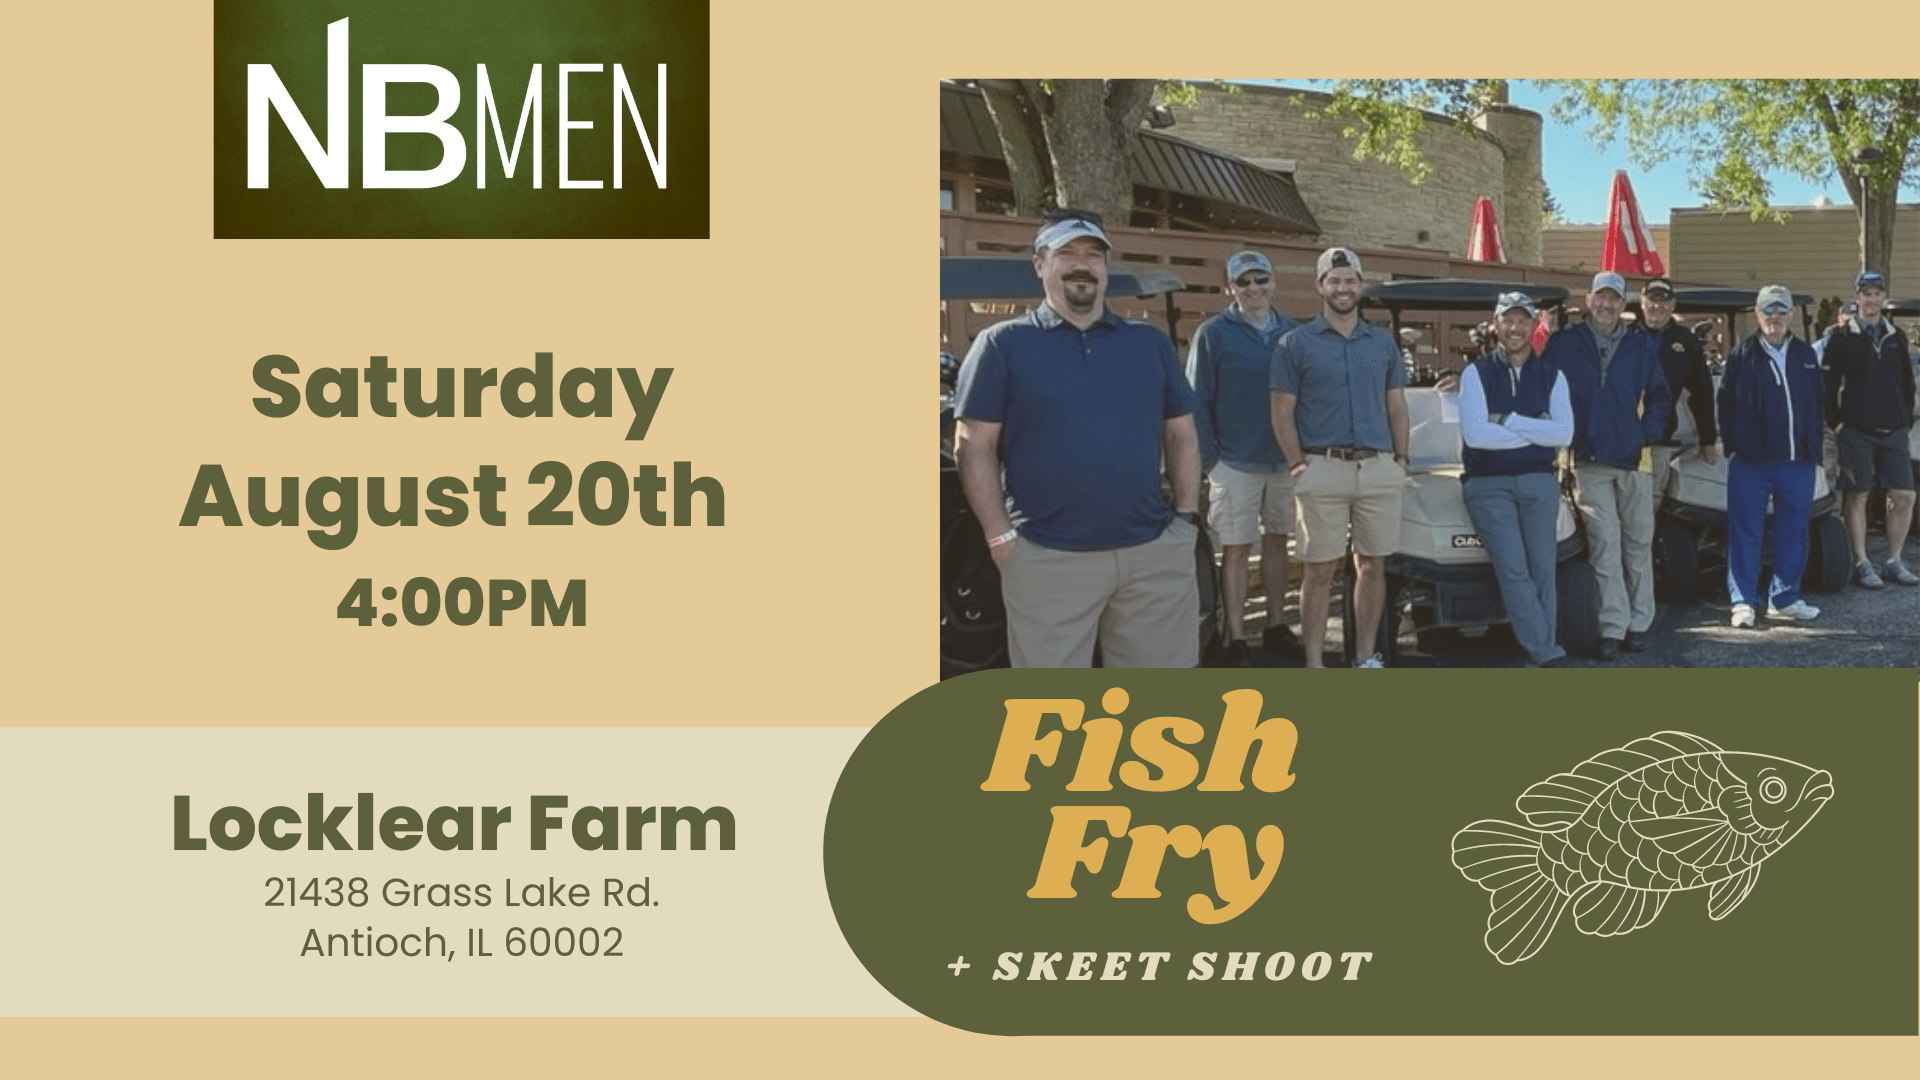 Featured image for Fish Fry + Skeet Shoot